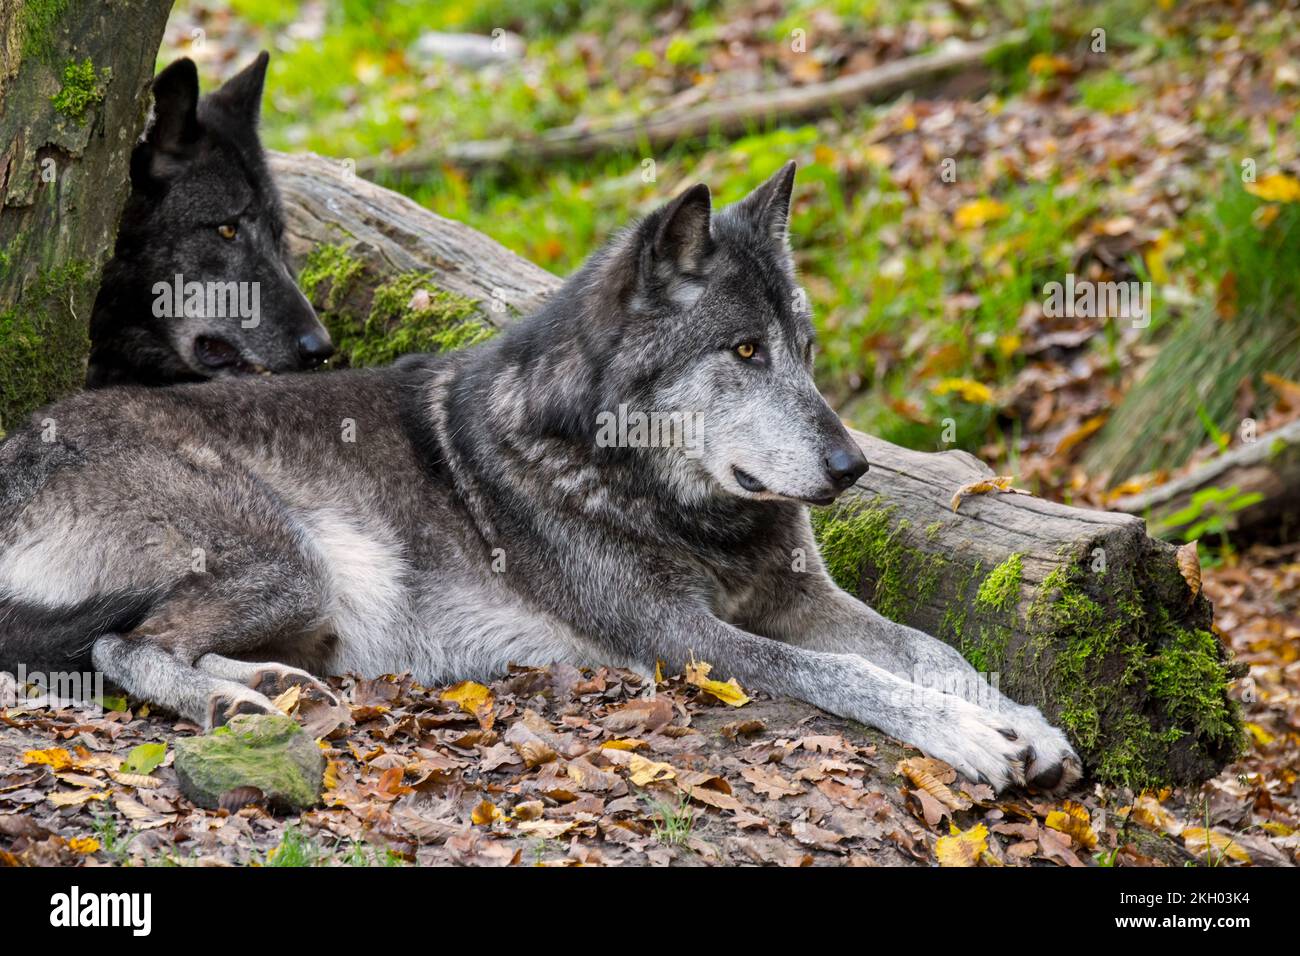 Two Northwestern wolves / Mackenzie Valley wolf / Canadian / Alaskan timber wolves (Canis lupus occidentalis) resting in forest Stock Photo